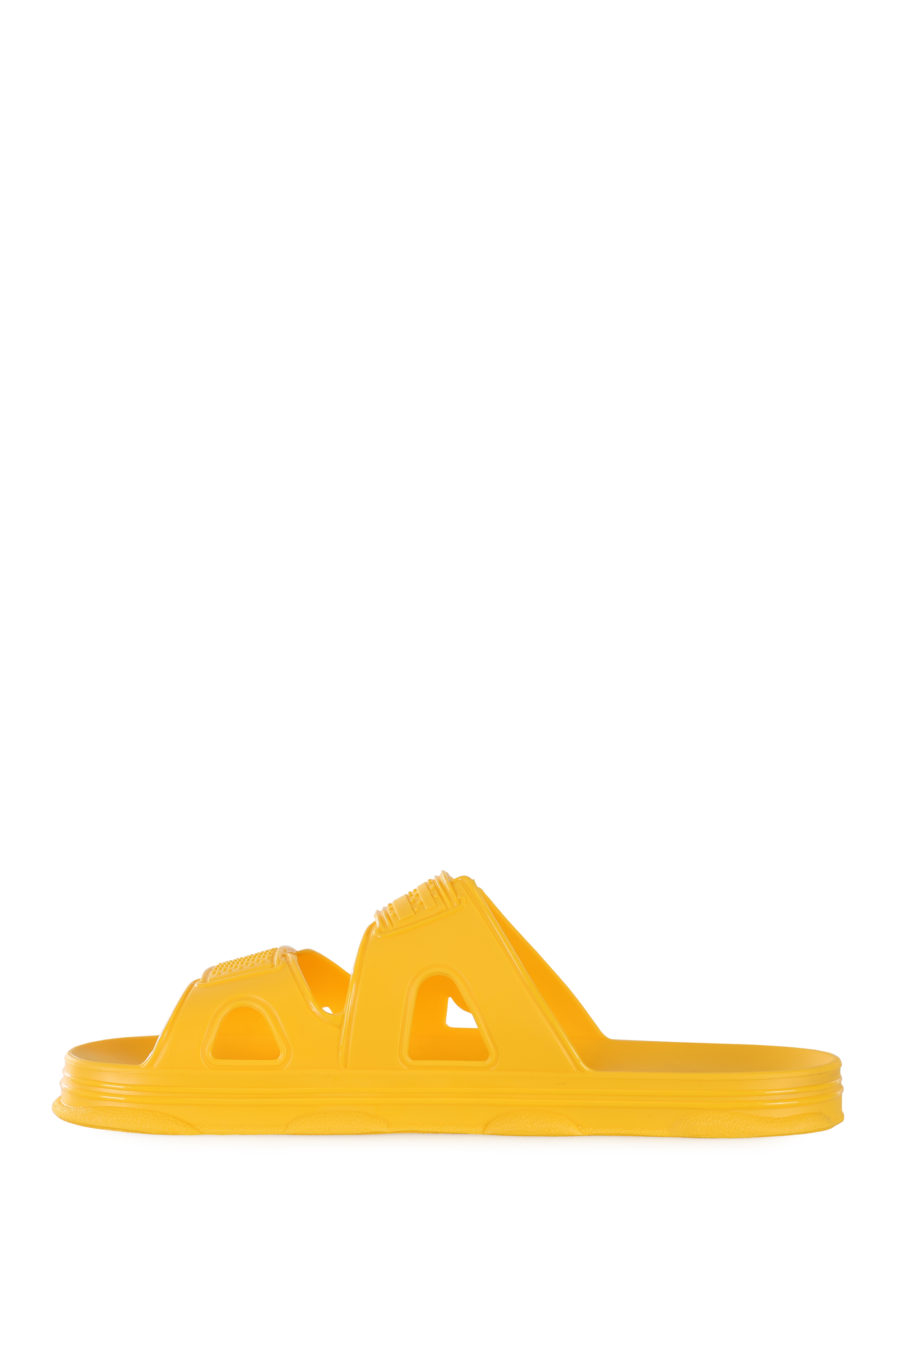 Yellow rubber flip flops with white logo - IMG 1687